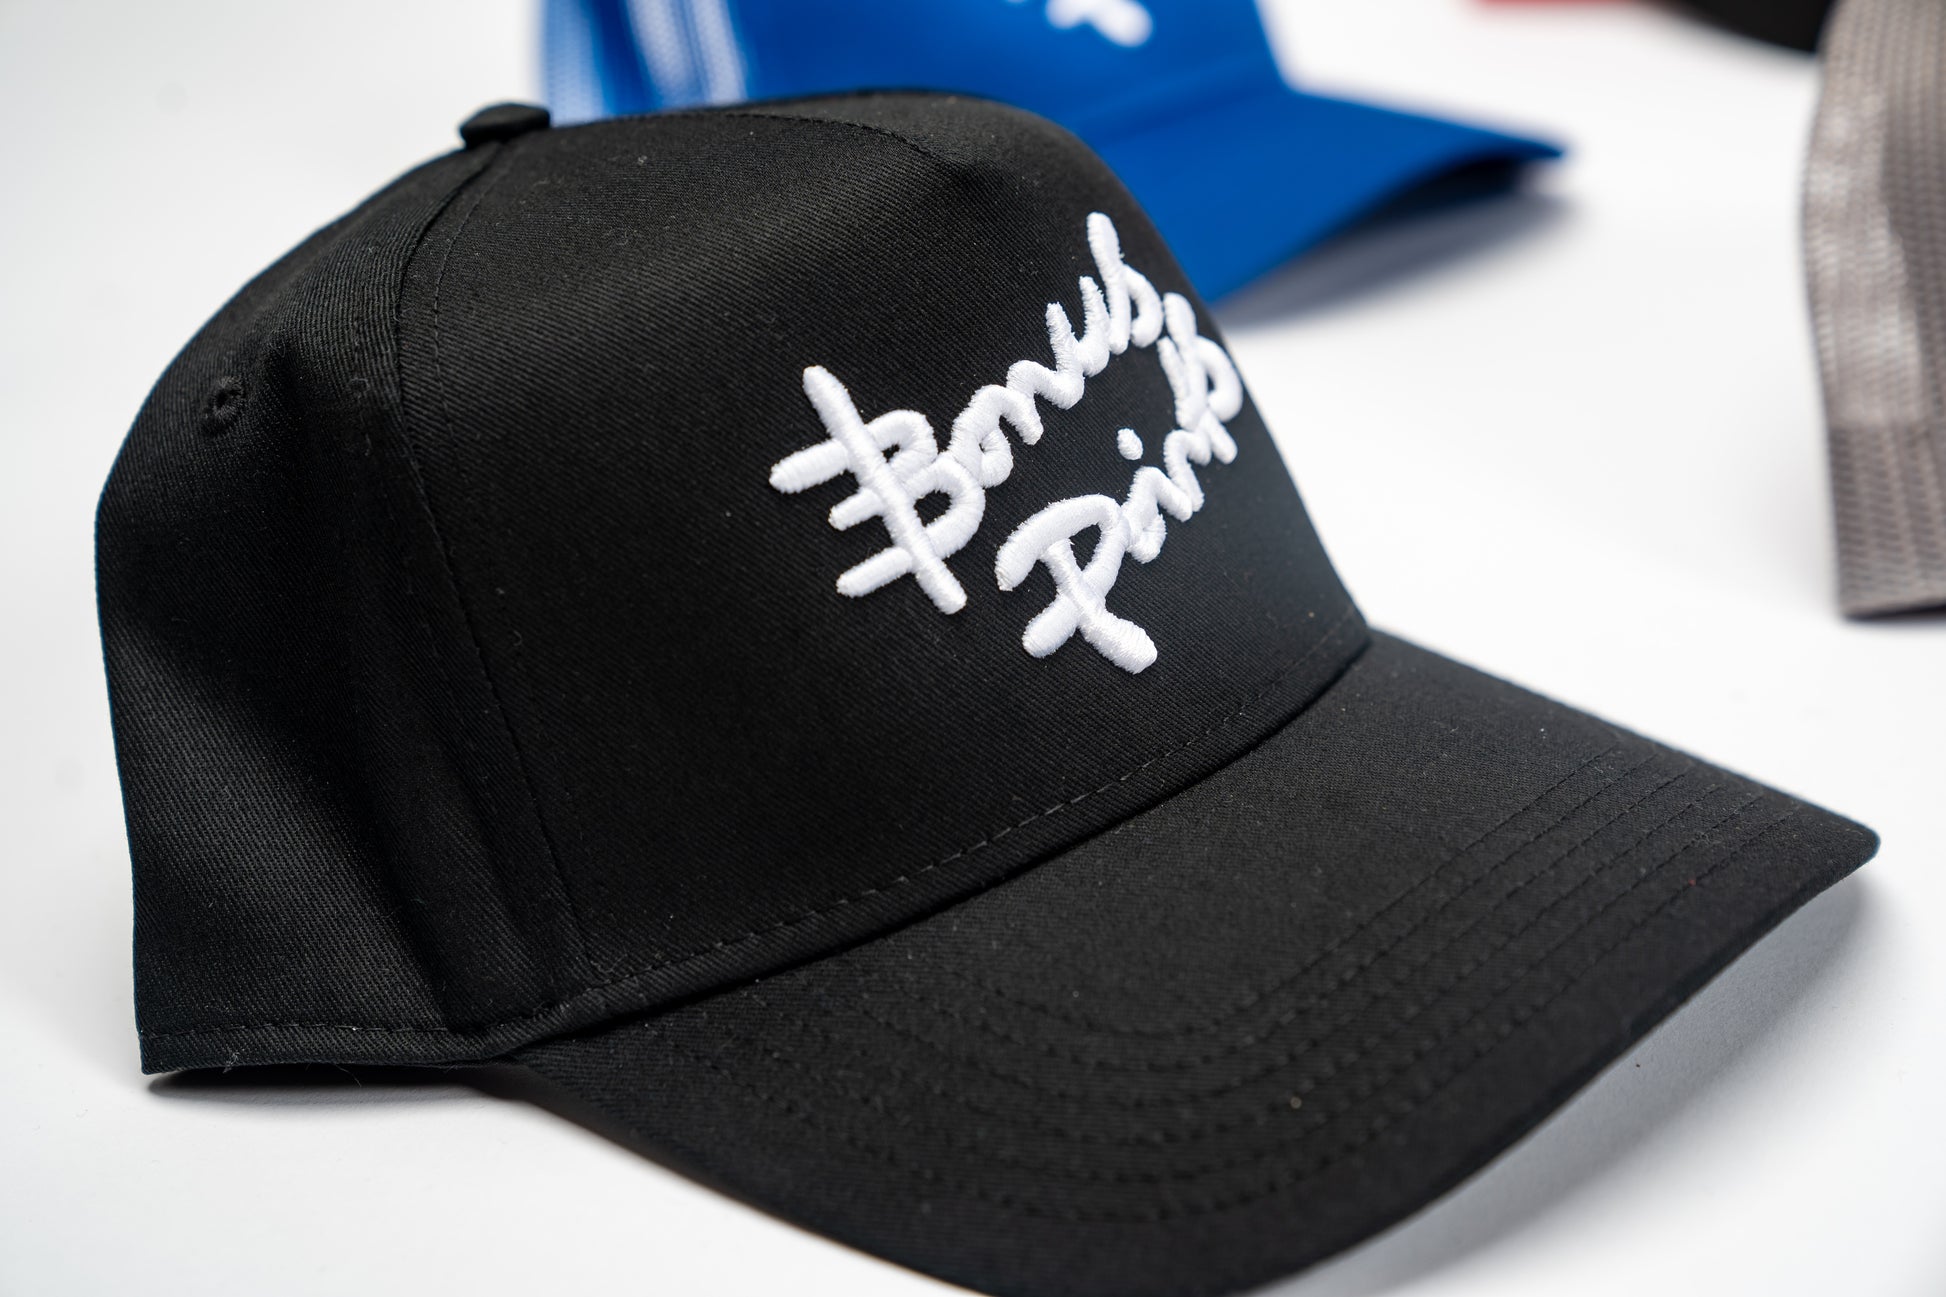 Close up Side View  of Black “Extra Credit”  SnapBack Hat.